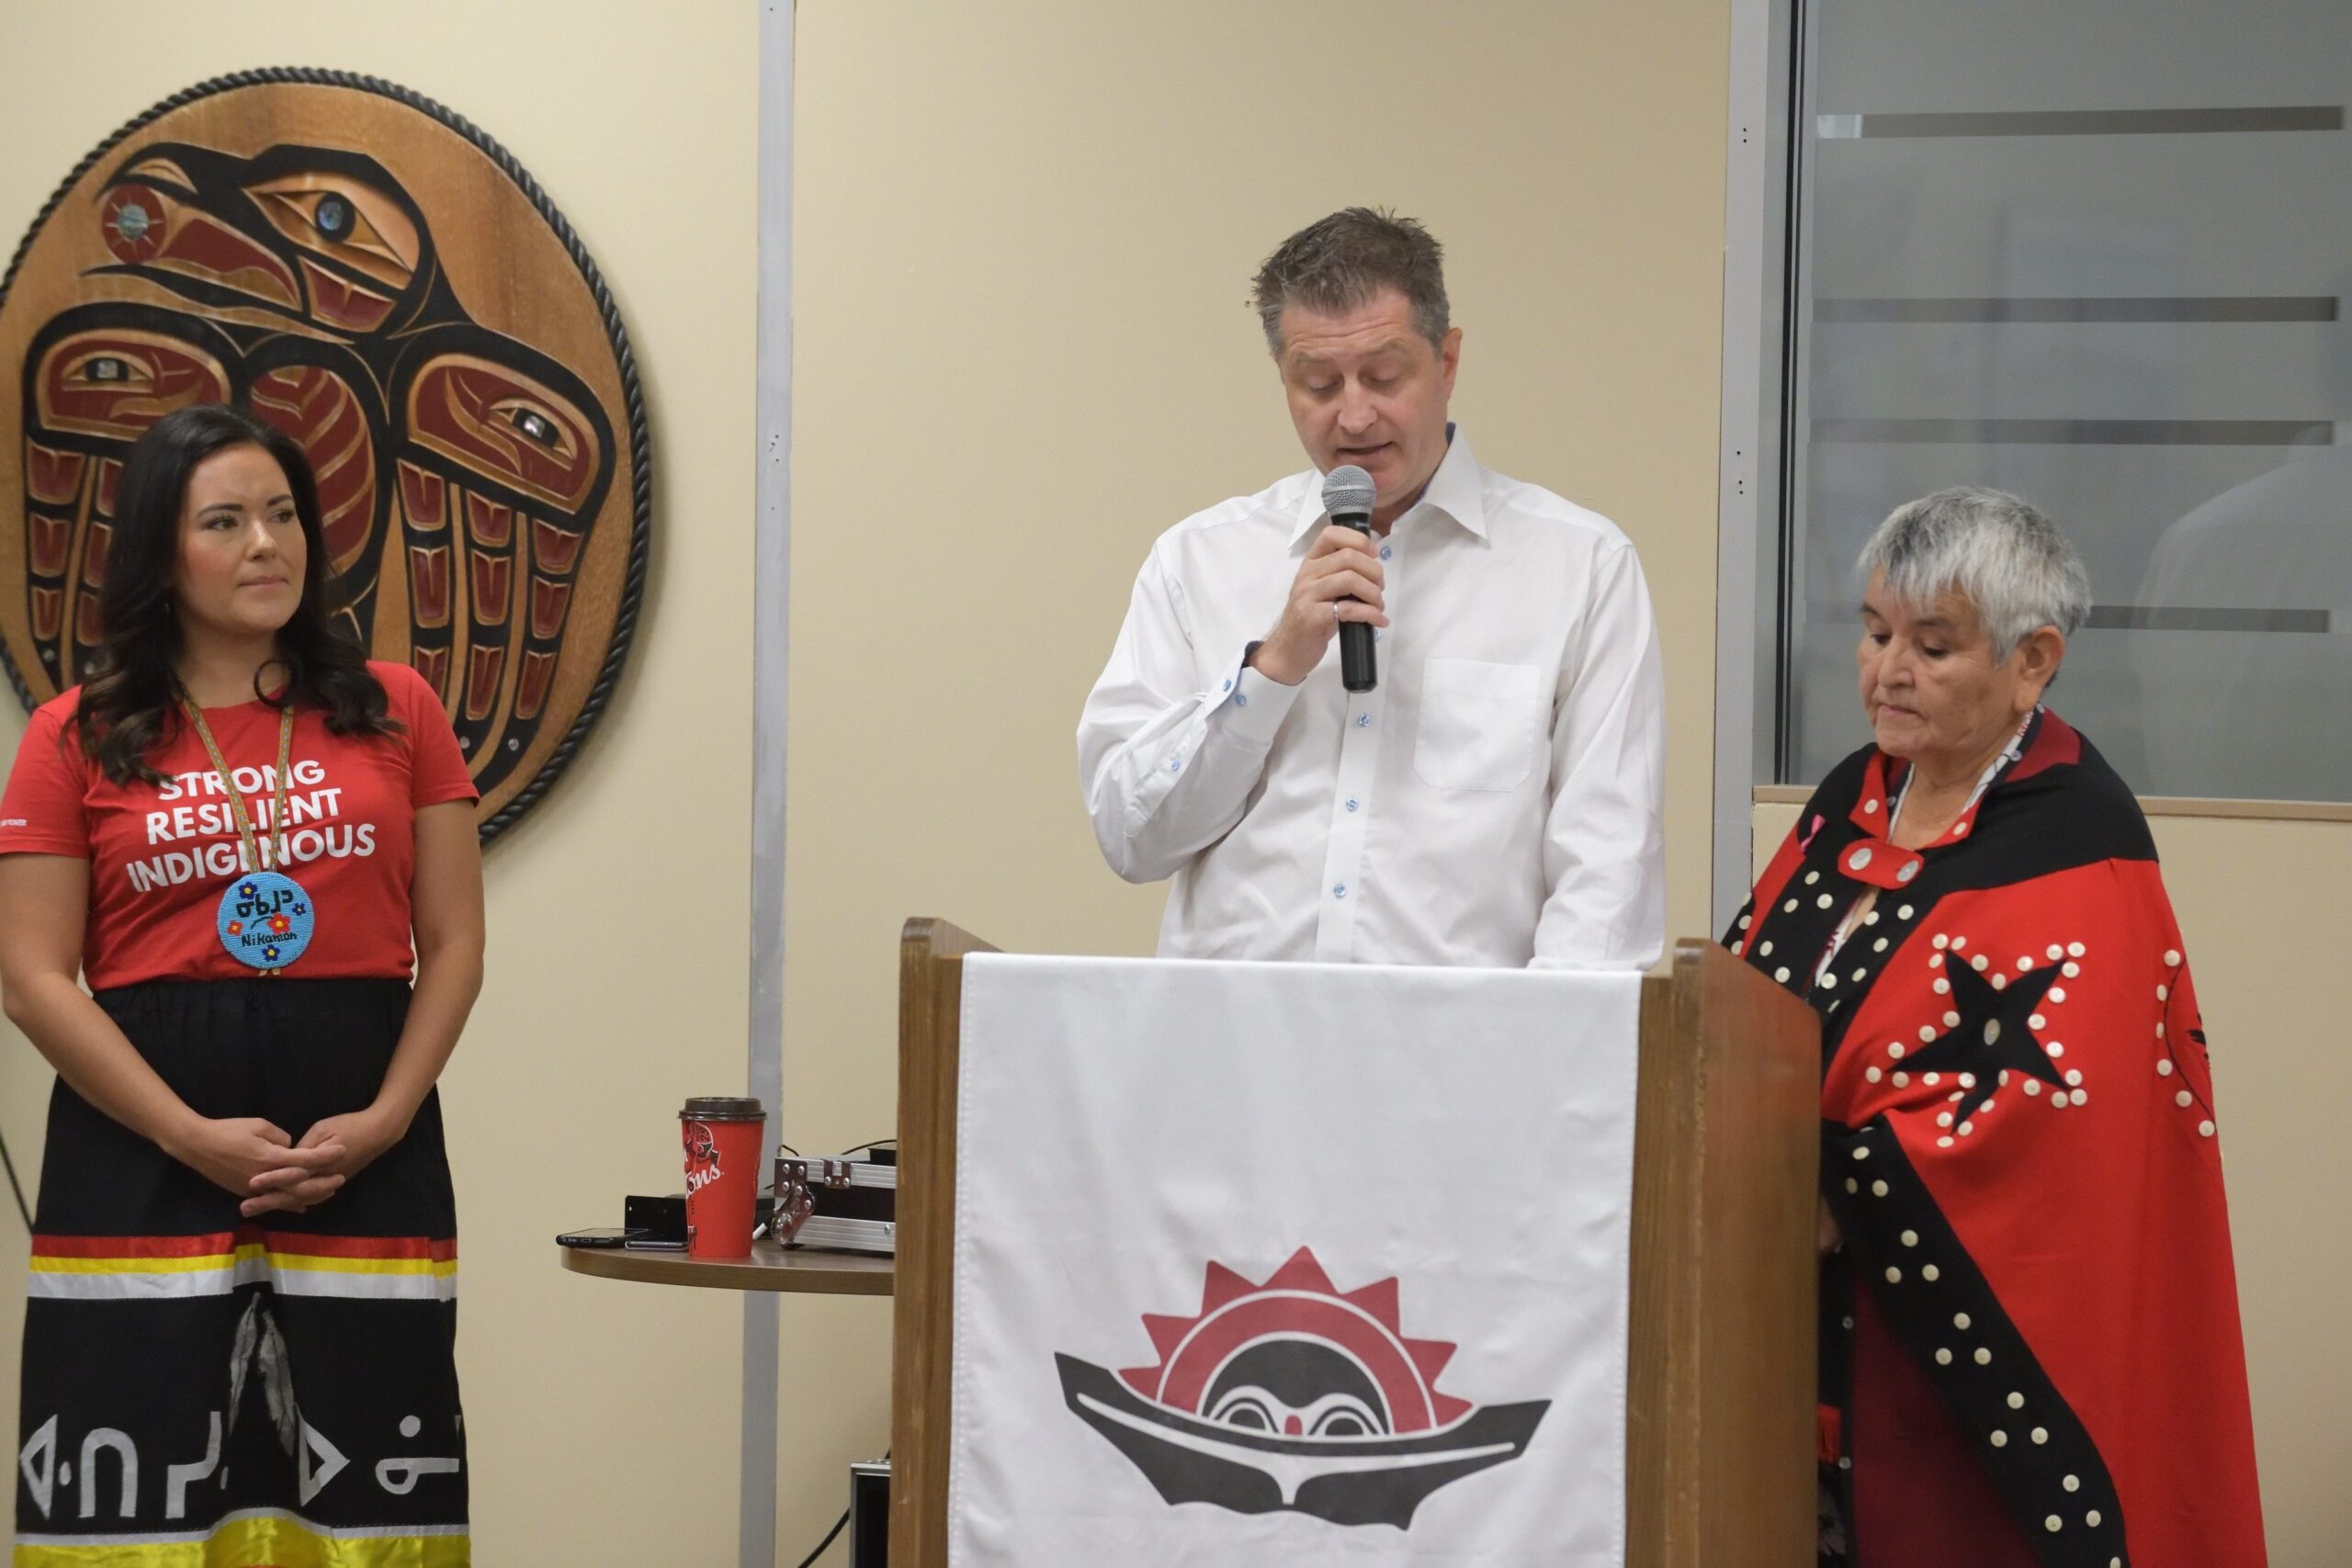 Recognizing and supporting conversations around Missing and Murdered Indigenous Women and Girls